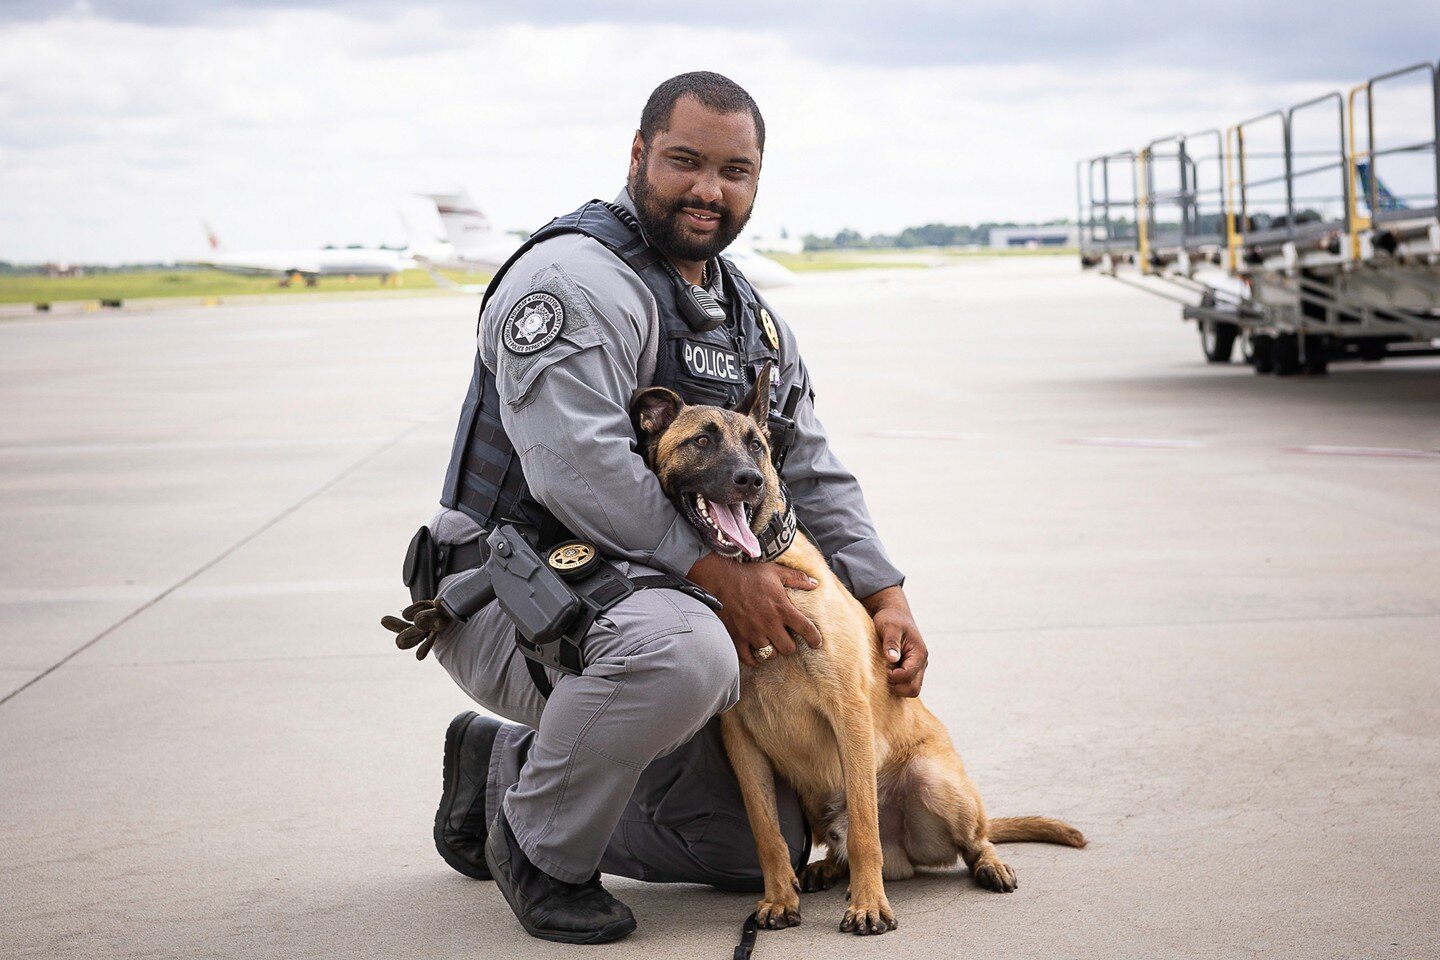 My friend Bo of the Charleston County Aviation Authority K9 Unit will be leaving Charleston and starting a new career with SC Highway Patrol - they are gaining a stellar team member and I know so many people in CHS will miss him. That's what life is 